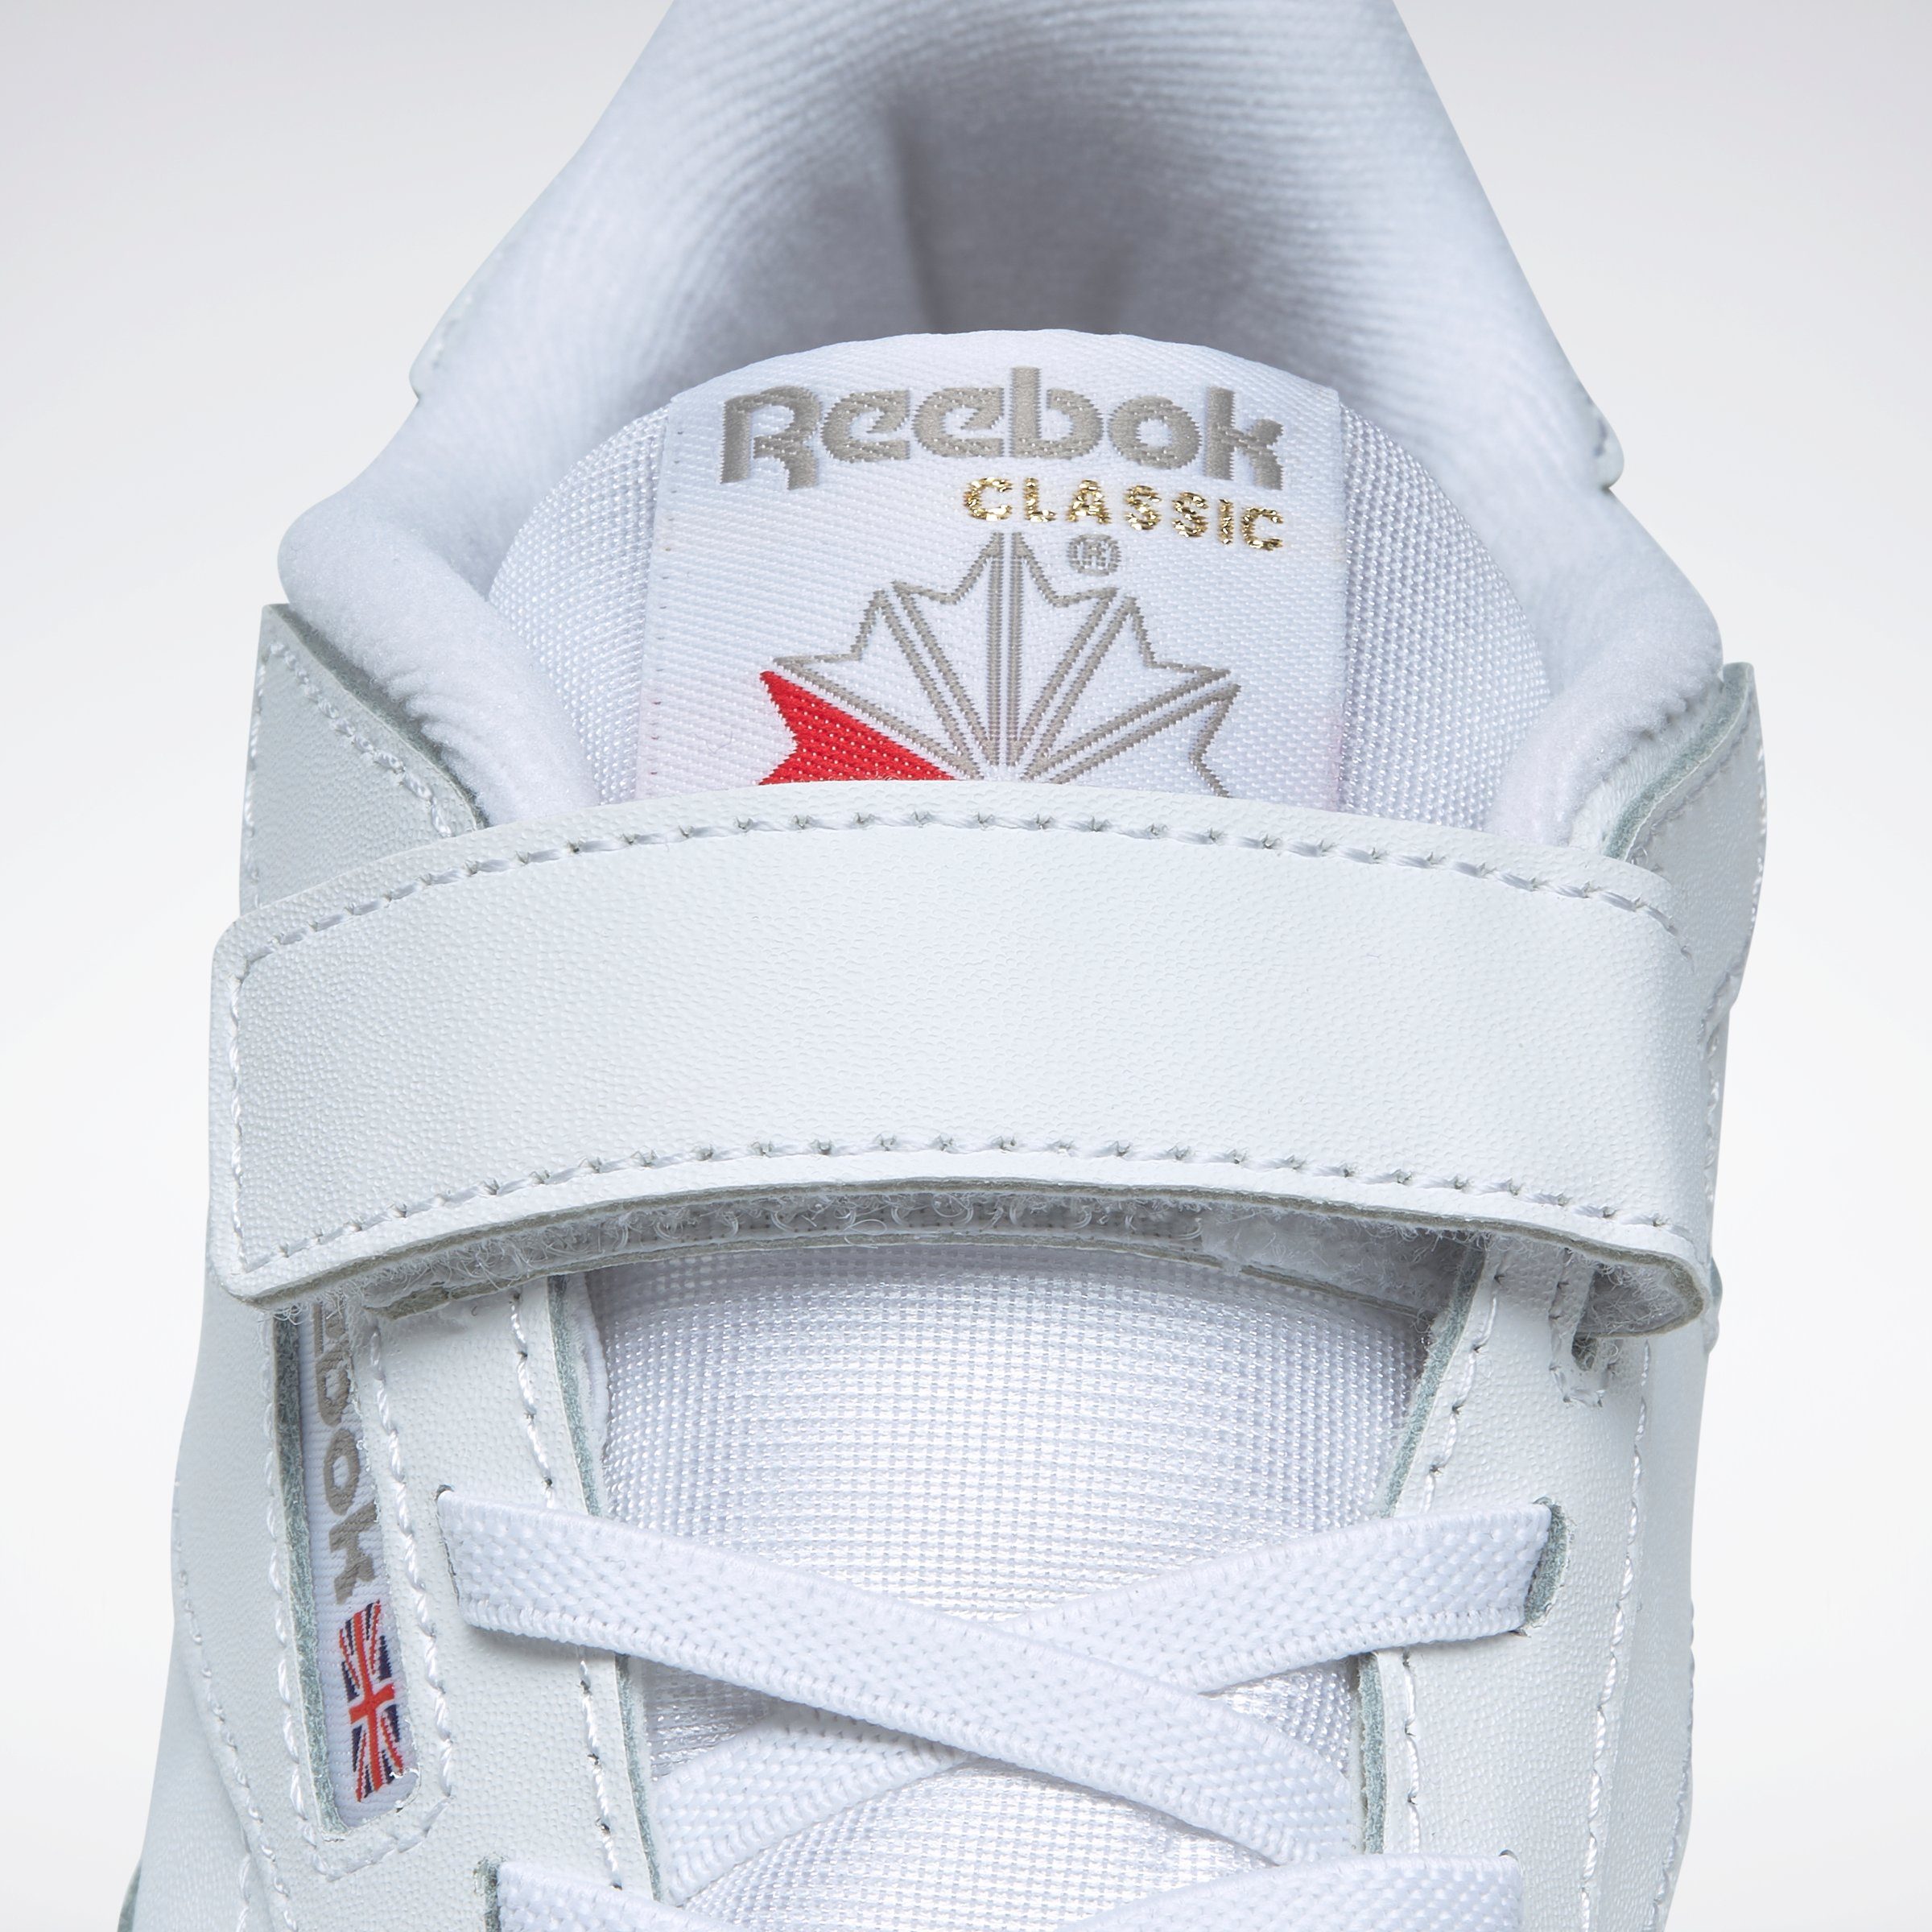 Reebok Classic CLASSIC LEATHER SHOES Sneaker